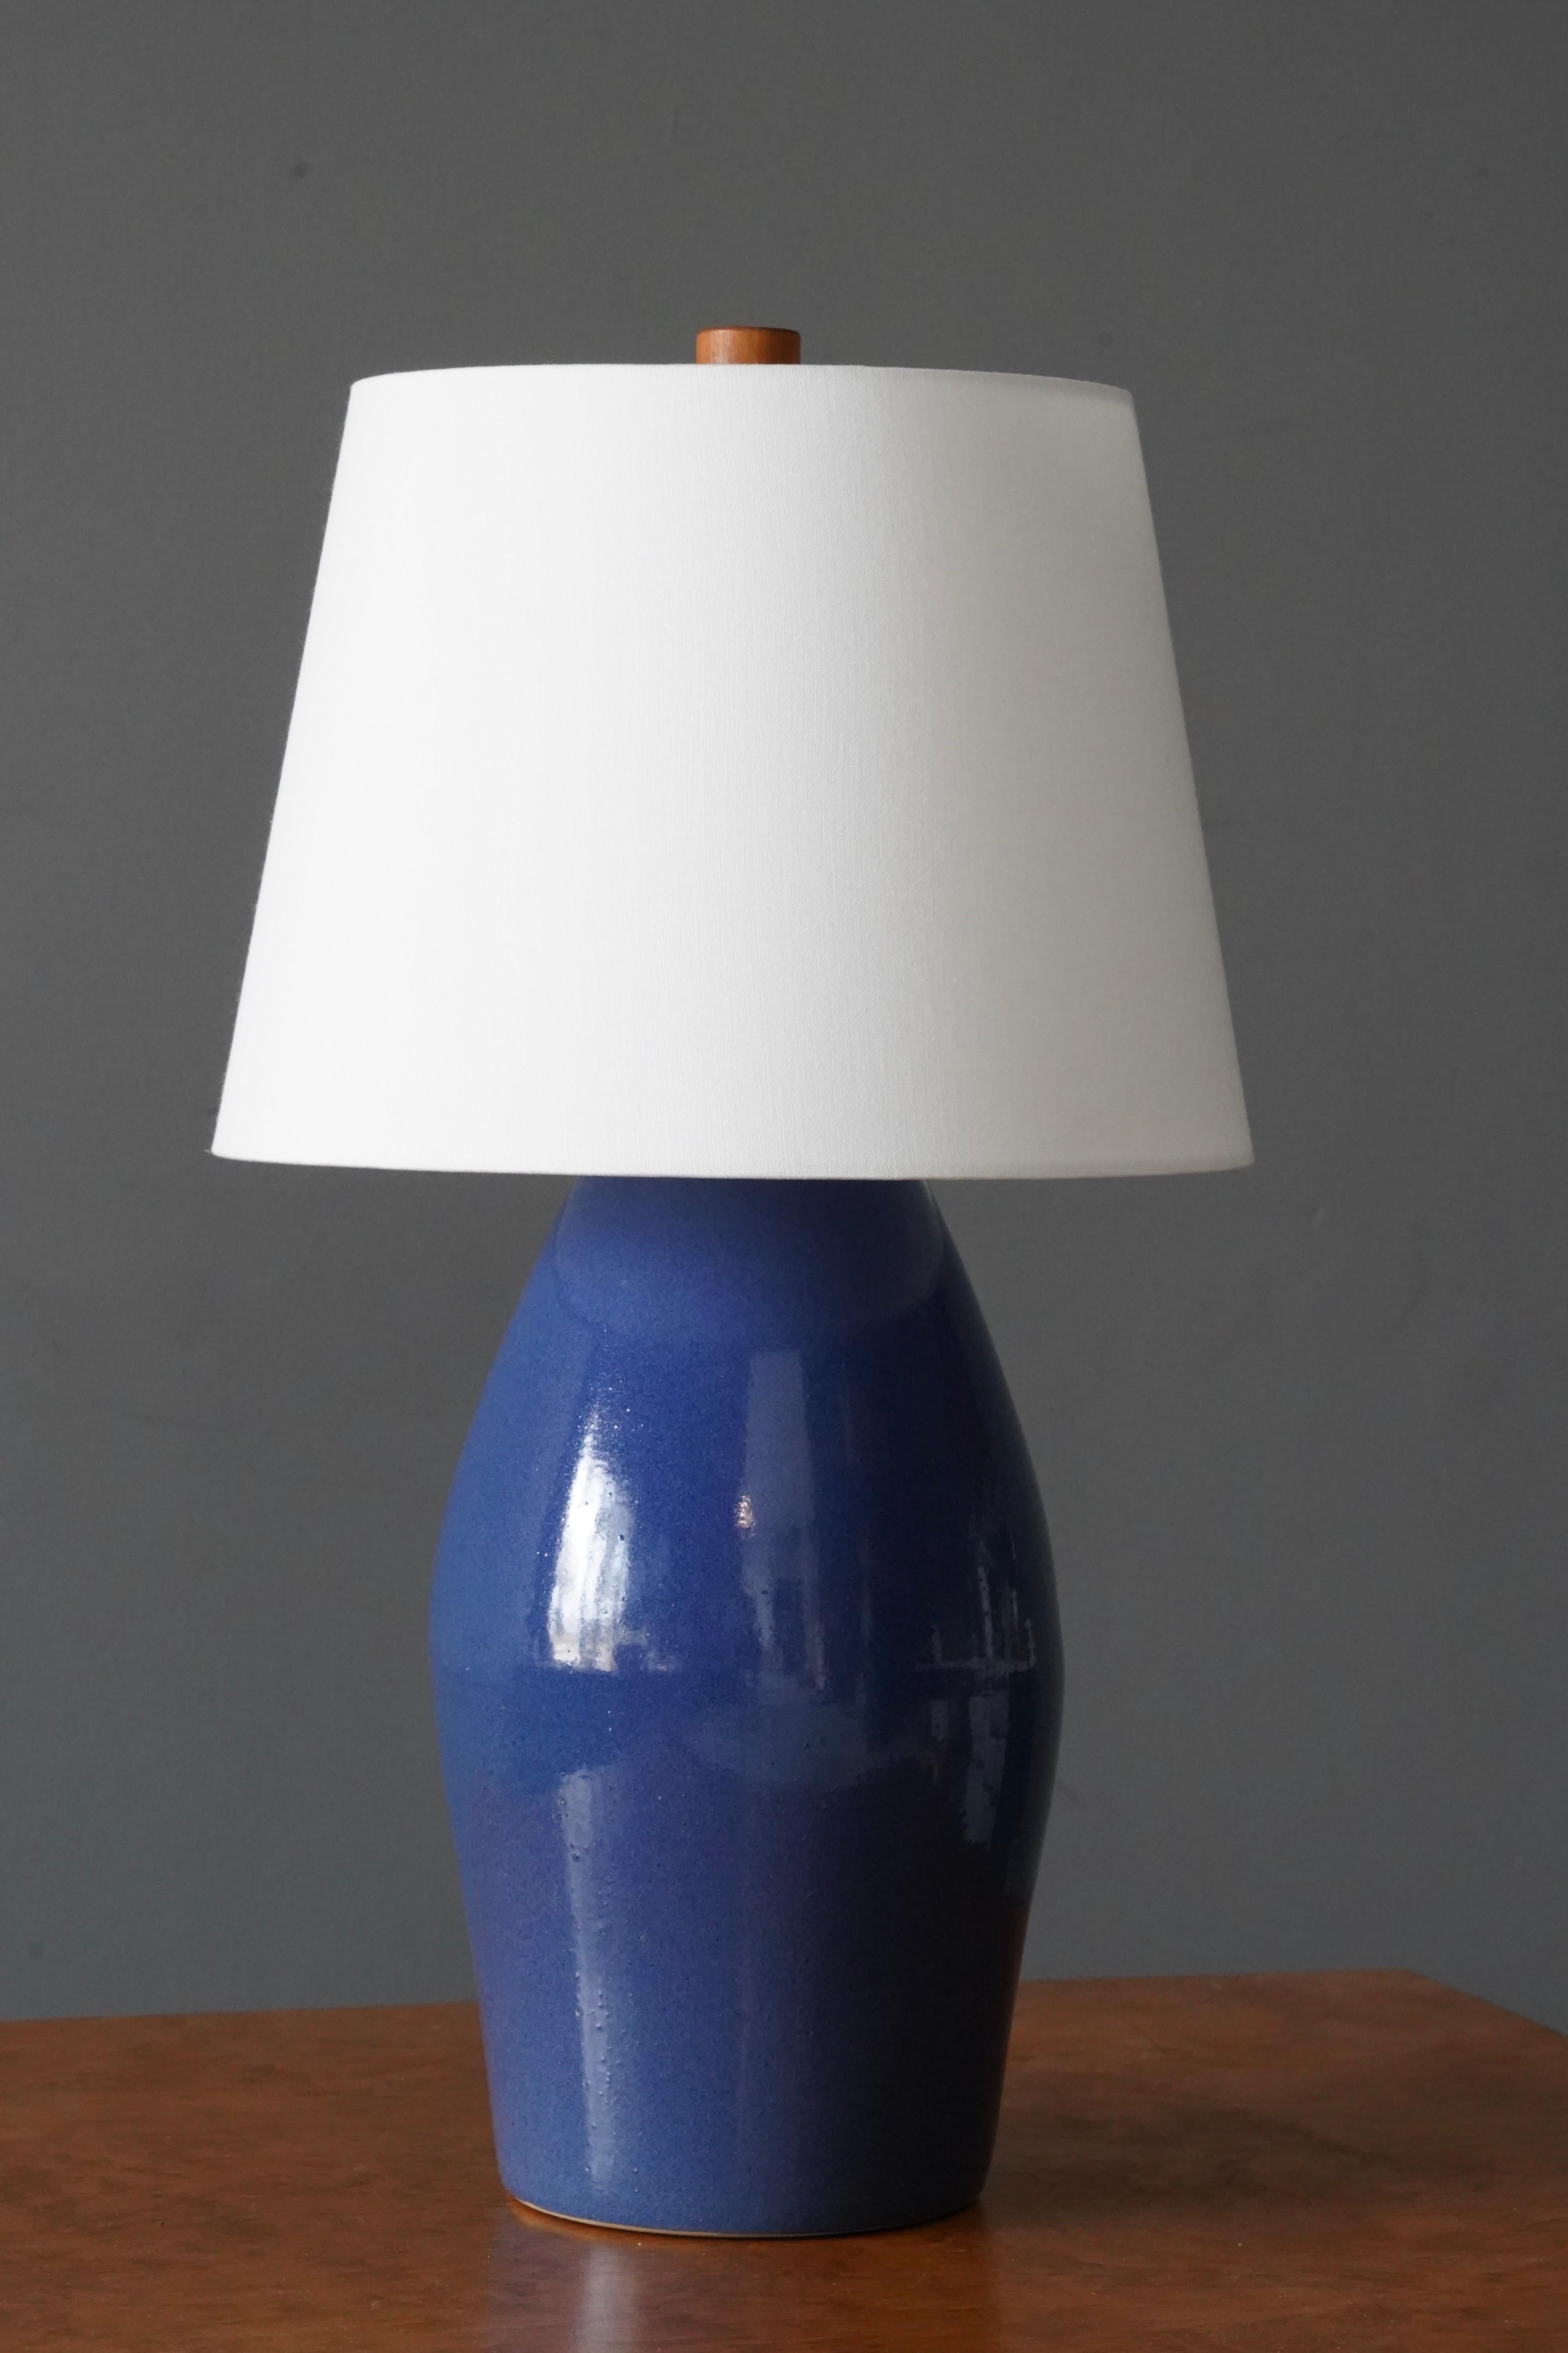 A table lamp designed by husband and wife duo Jane & Gordon Martz. Produced by Marshall Studios, Indianapolis. 

The base is slip-cast and then dipped into glaze. Base is signed.

Sold without lampshade. Stated dimensions exclude lampshade. As